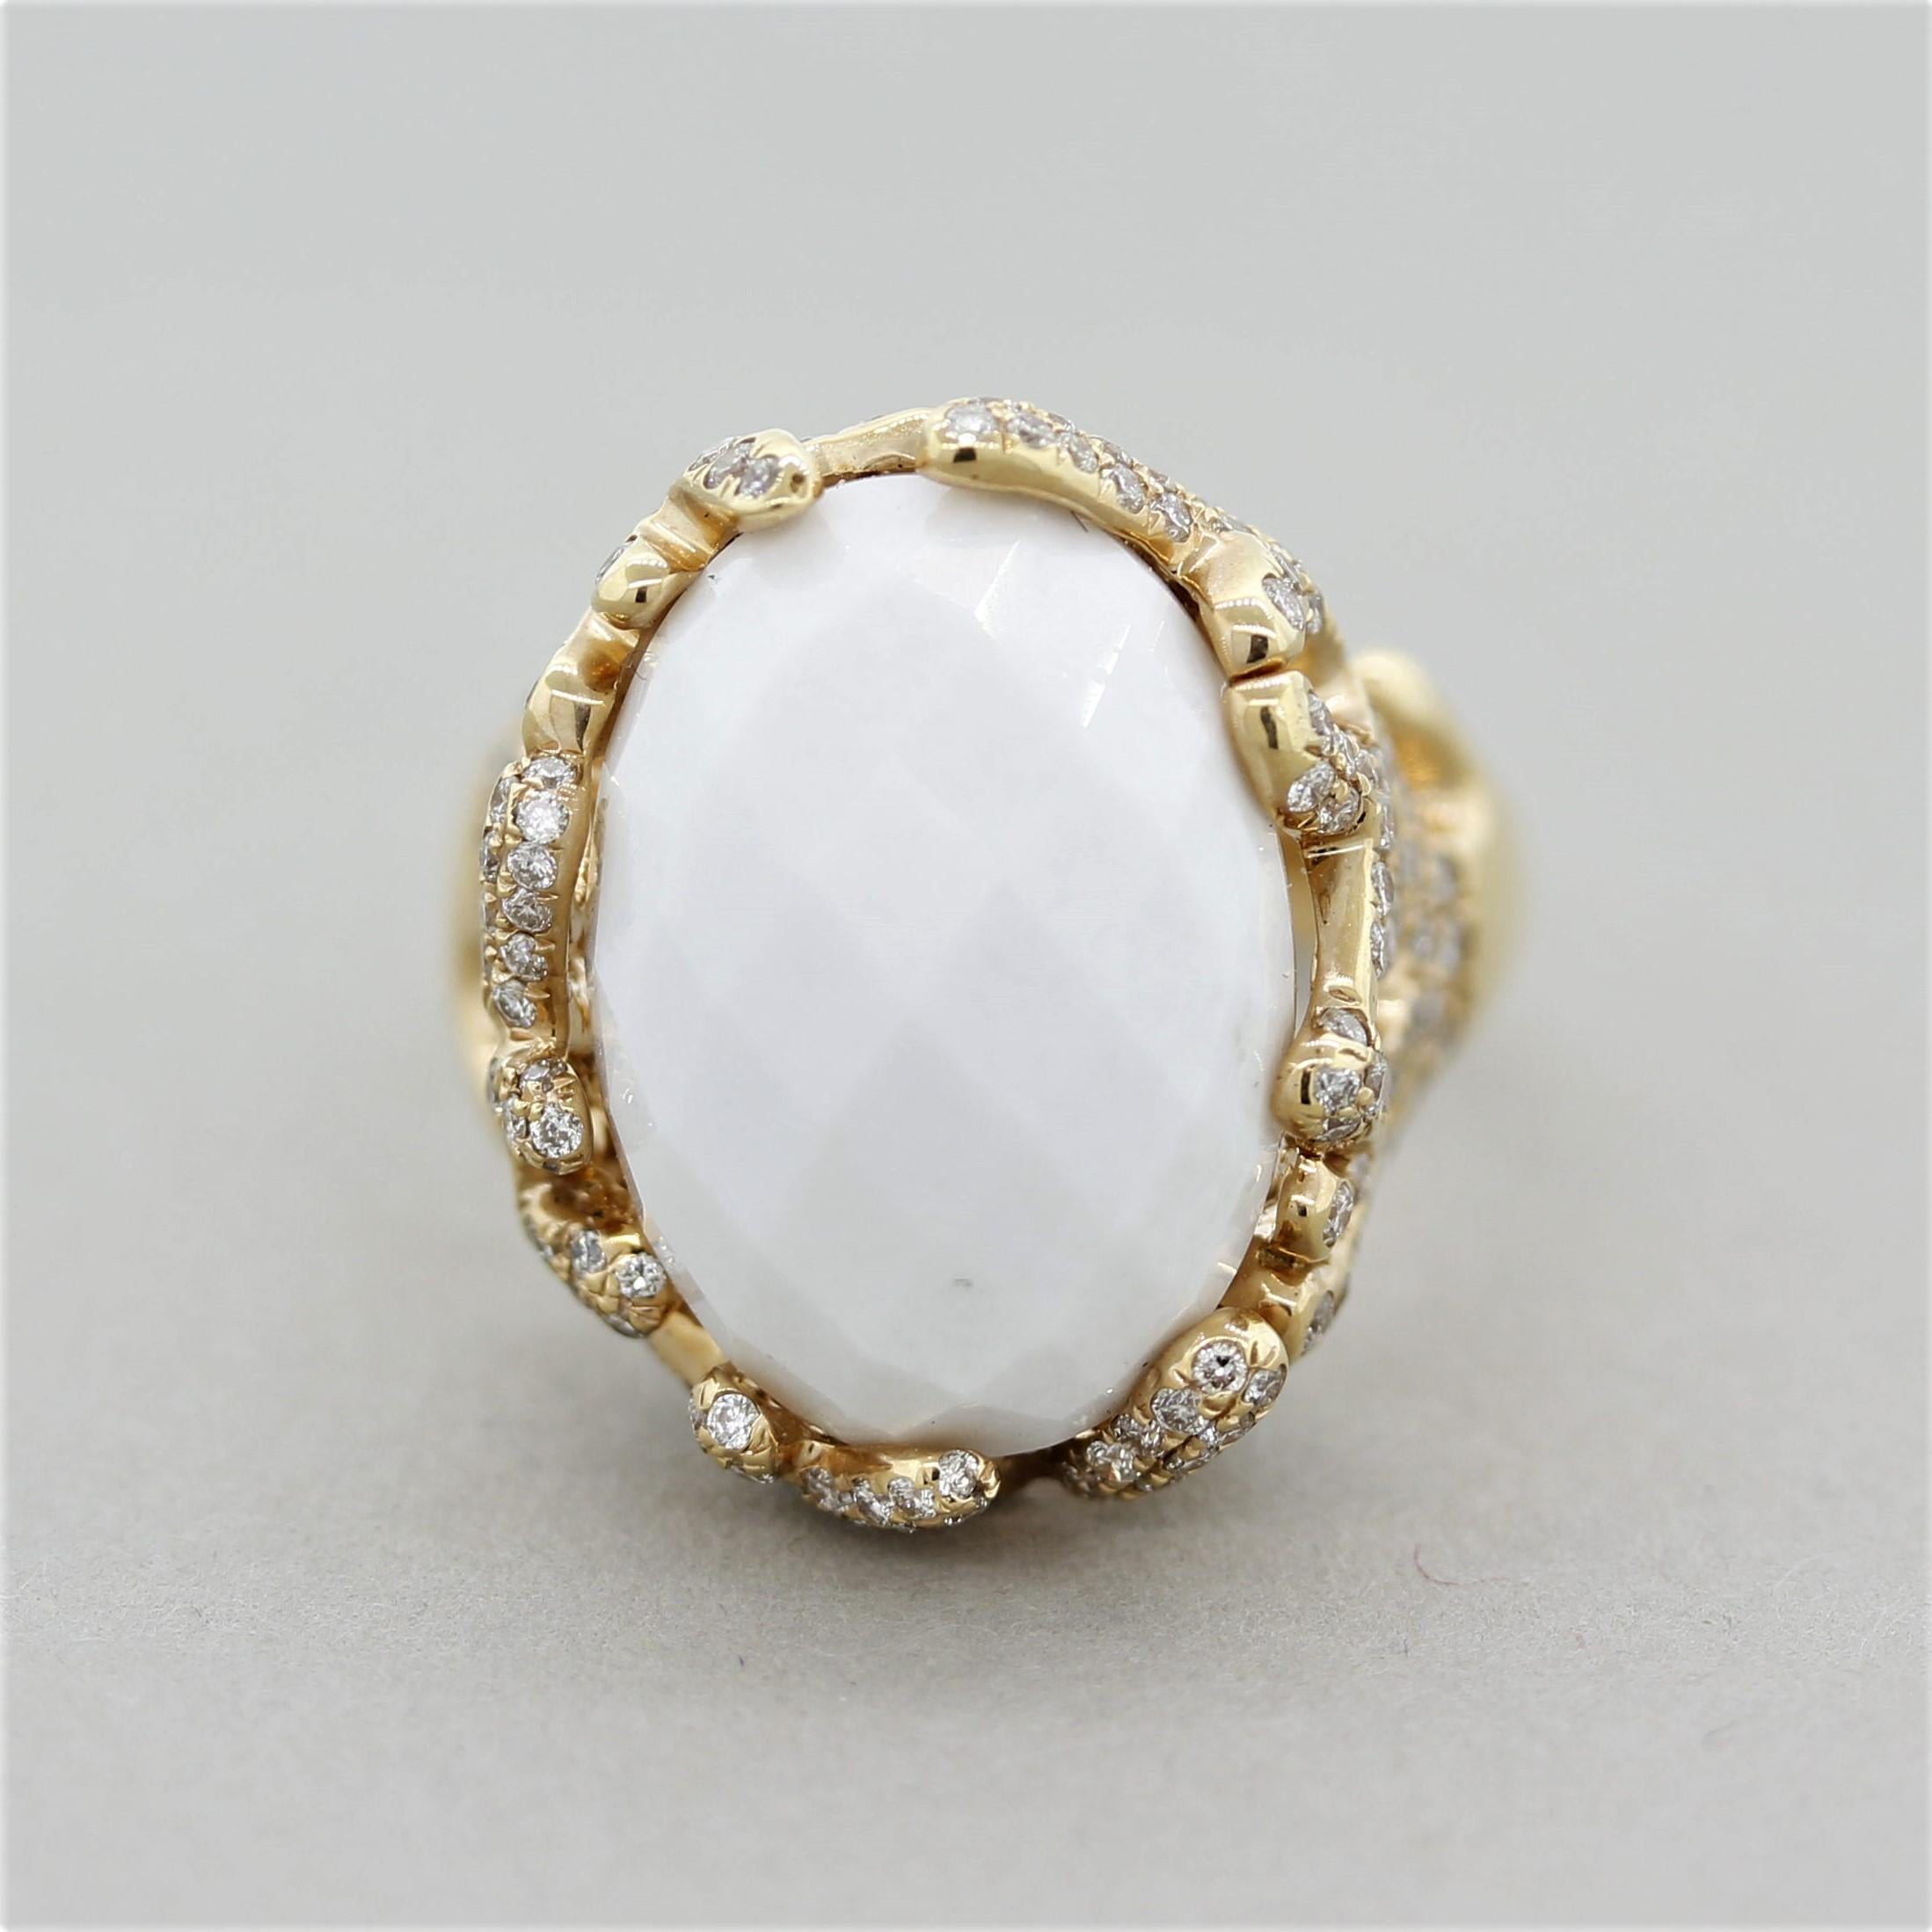 A simple yet stylish ring featuring a 13.10 carat rose-cut white onyx. It is accented by 1.53 carats of round brilliant-cut diamonds set in 18k rose gold. A stylish ring that can be worn casually or dressed up for a night out.

Ring Size 7